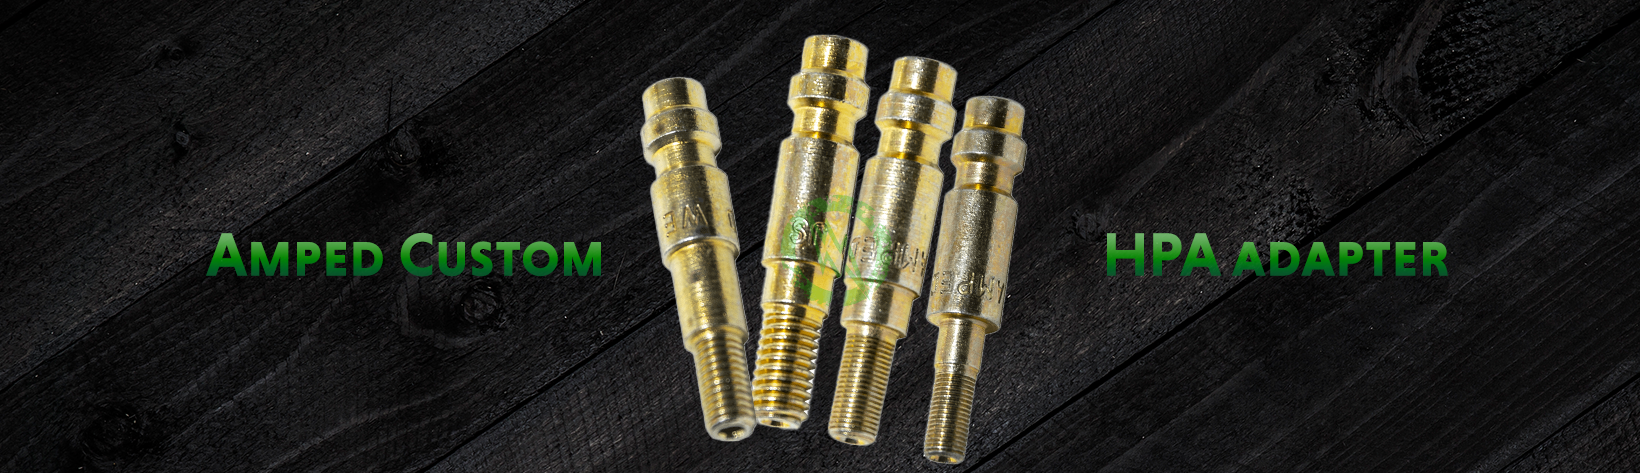 Amped Airsoft Custom HPA Valve Adapters for Gas and GBB Airsoft Rifle and Pistol Magazines